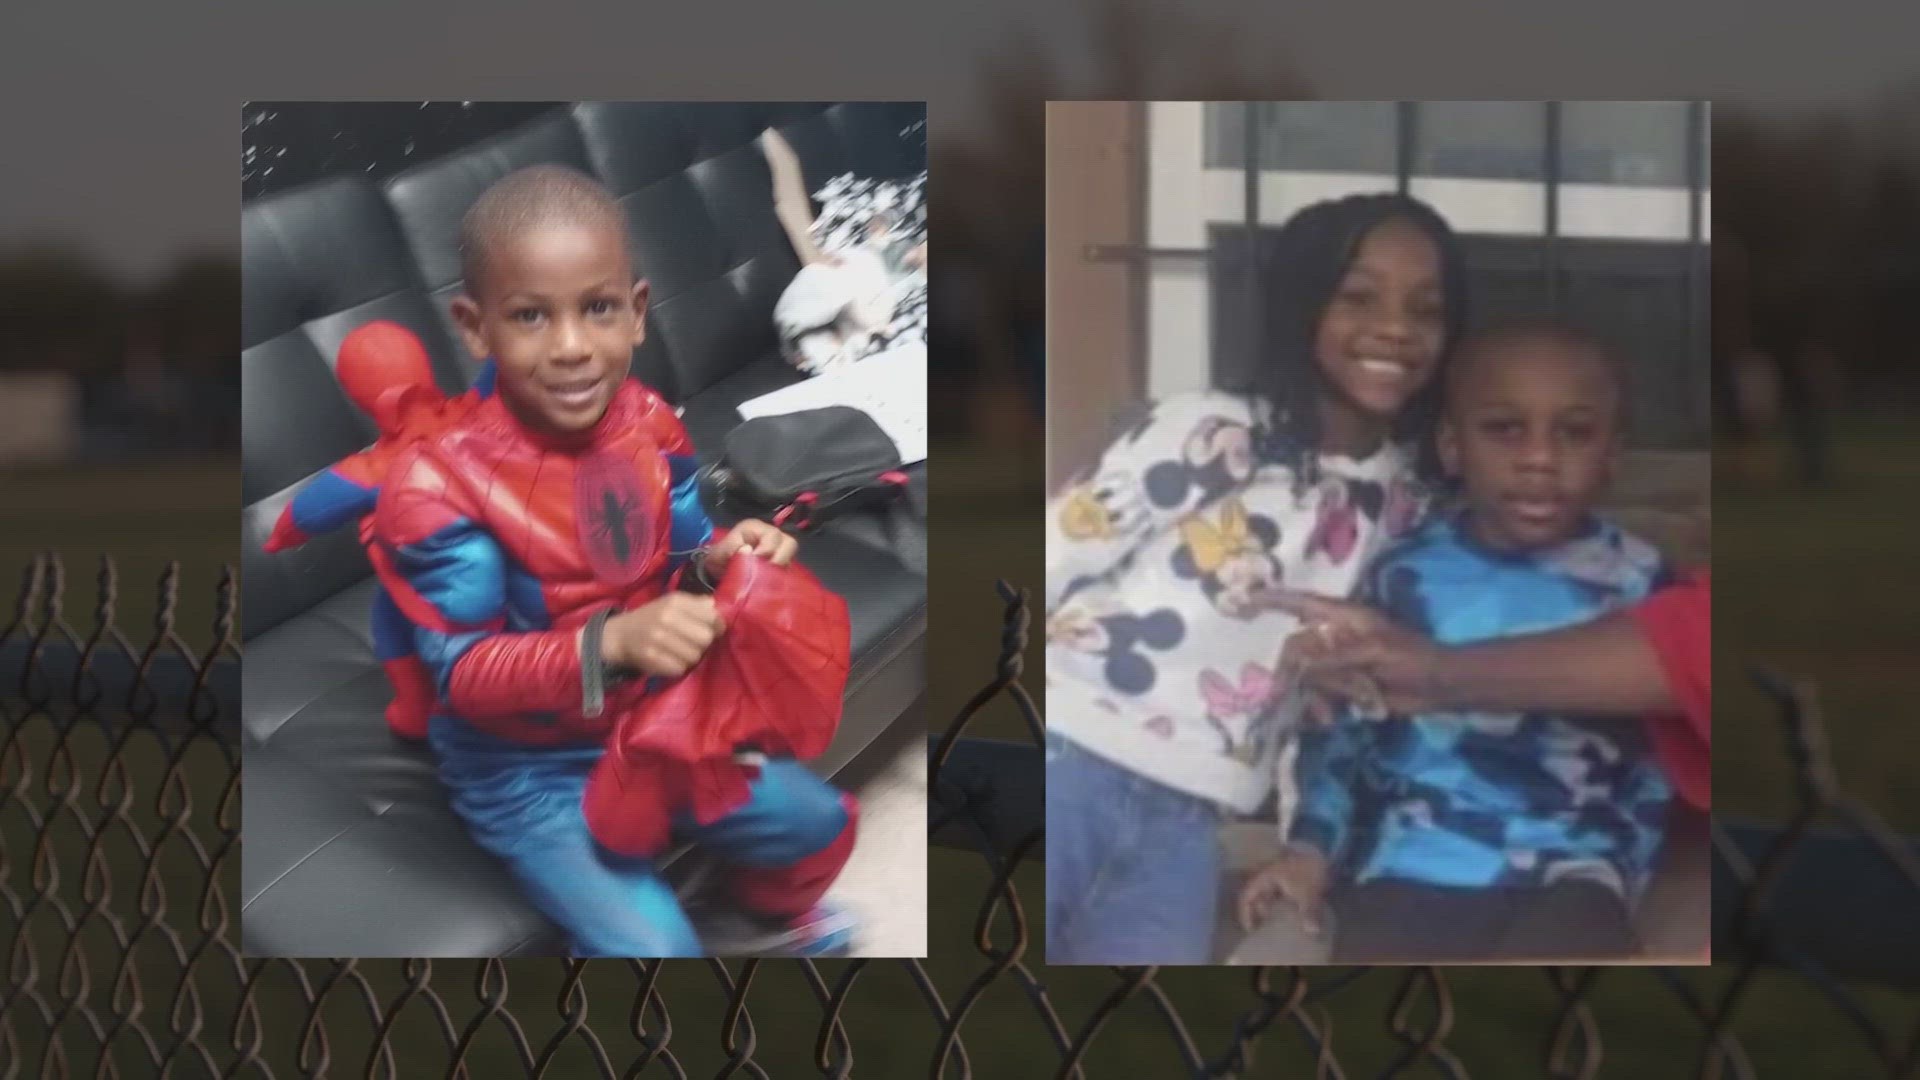 Three children -- a 6-year-old and two 5-year-old twins -- were stabbed to death on Friday, and their mother, 25-year-old Shamaiya Hall, is accused in their killings